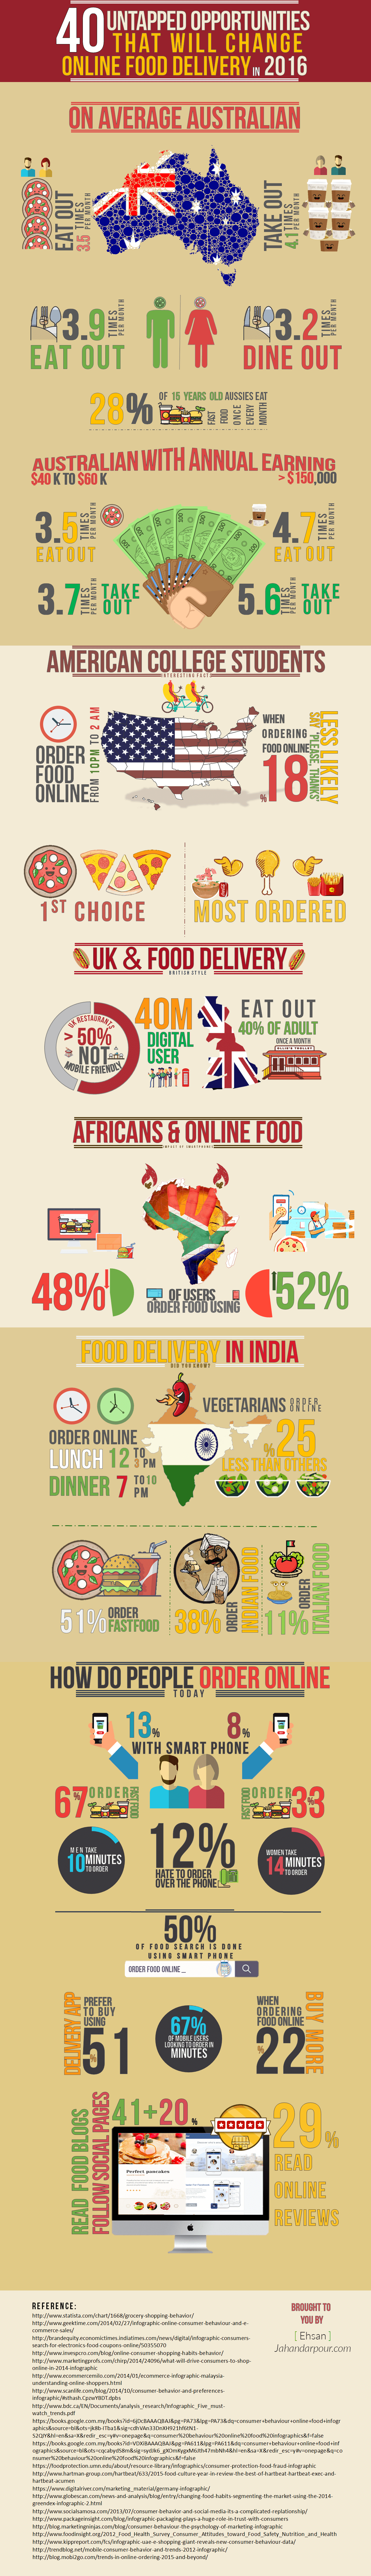 online food order and delivery facts